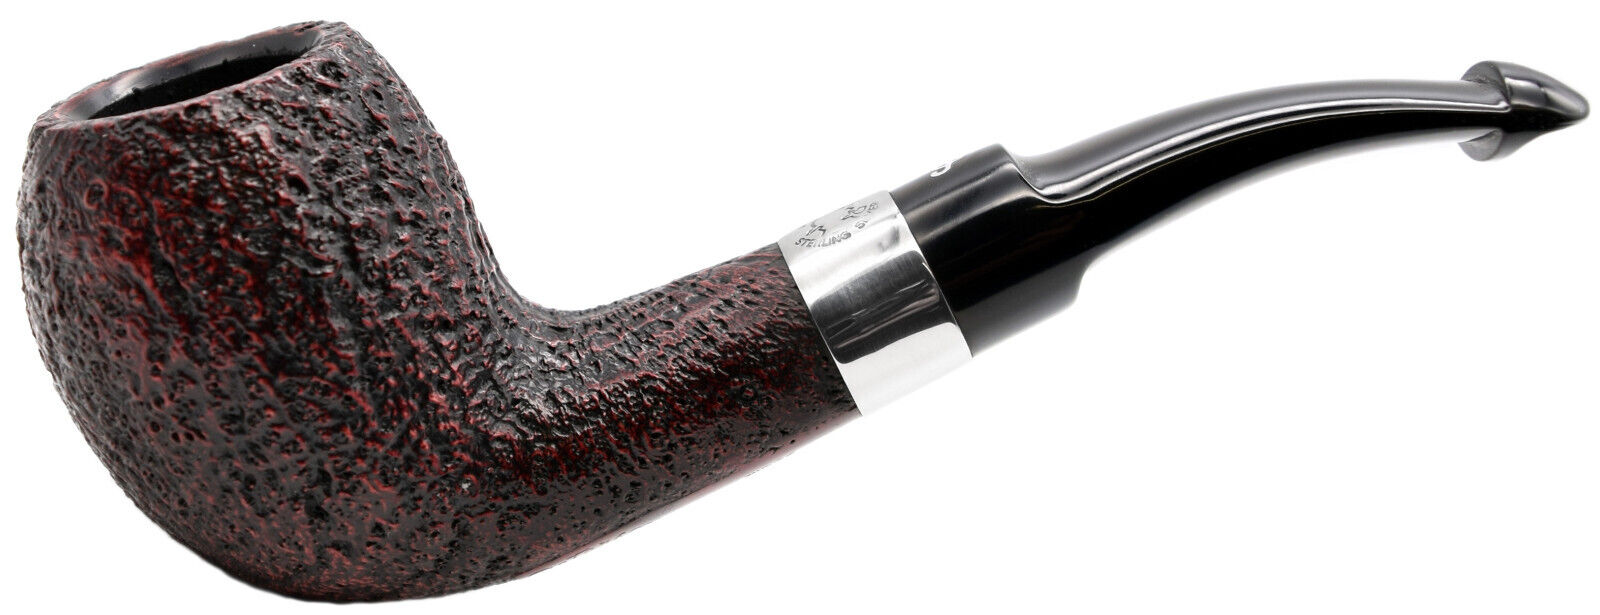 Peterson Sherlock Holmes 'Strand' Red and Black Sandblasted Silver Mounted Pipe